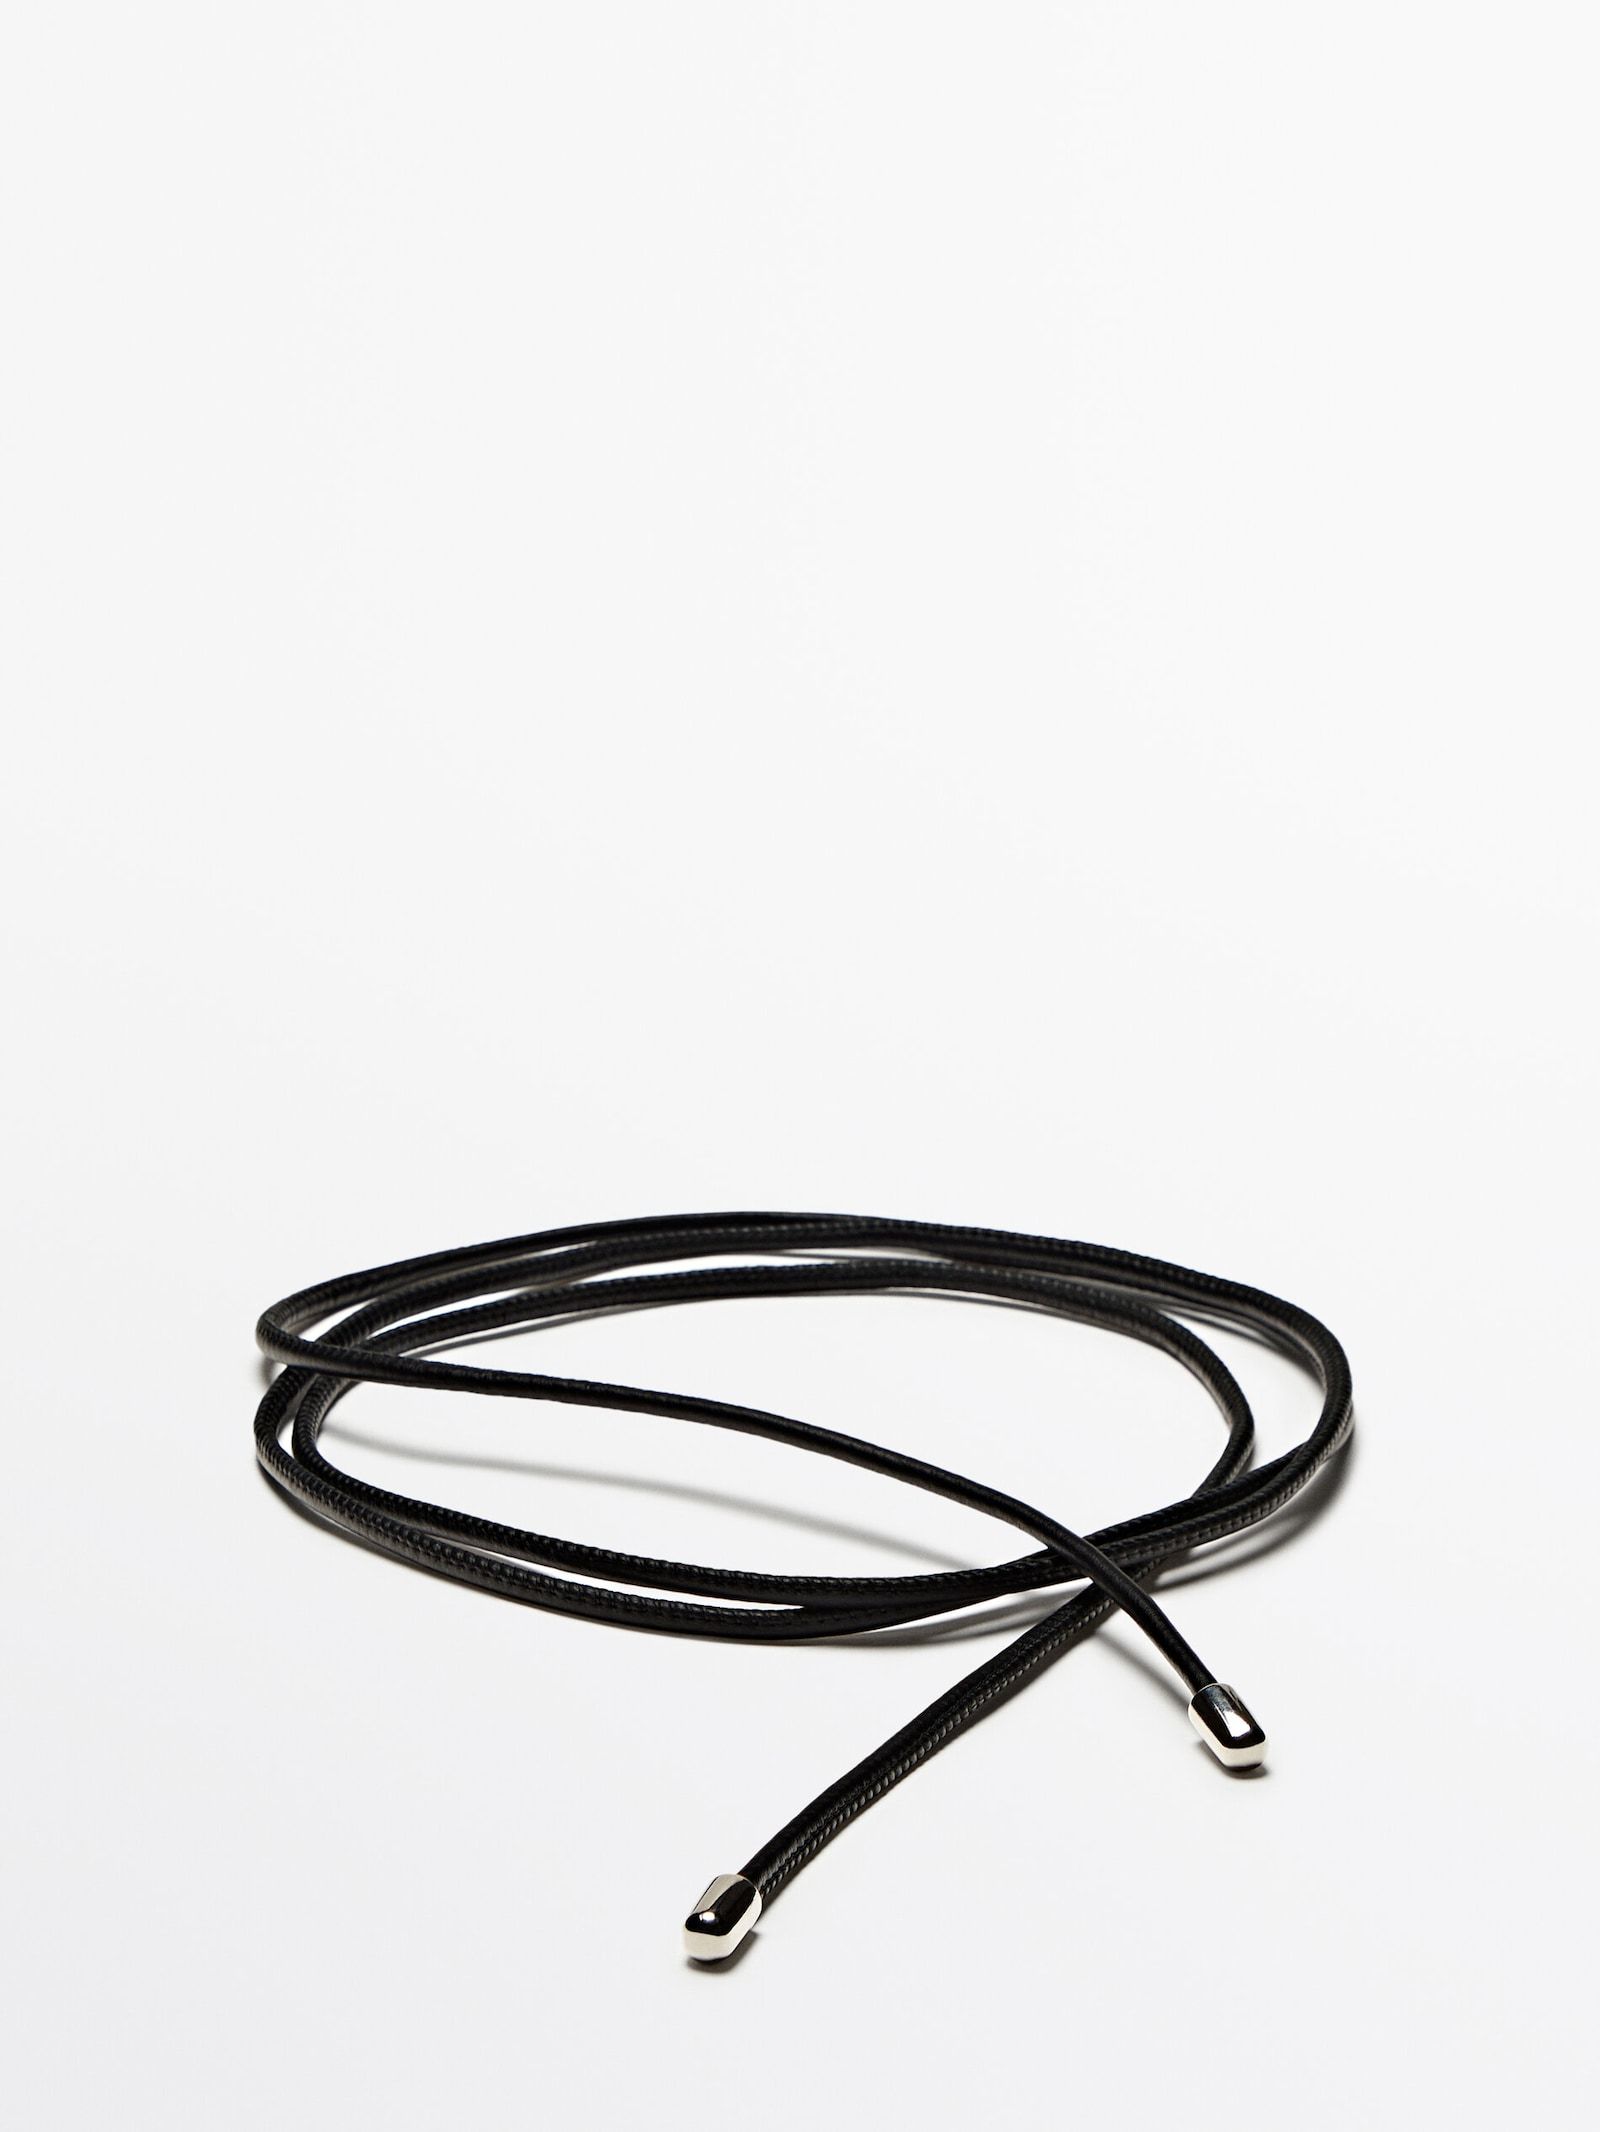 Leather cord belt with knot detail | Massimo Dutti UK